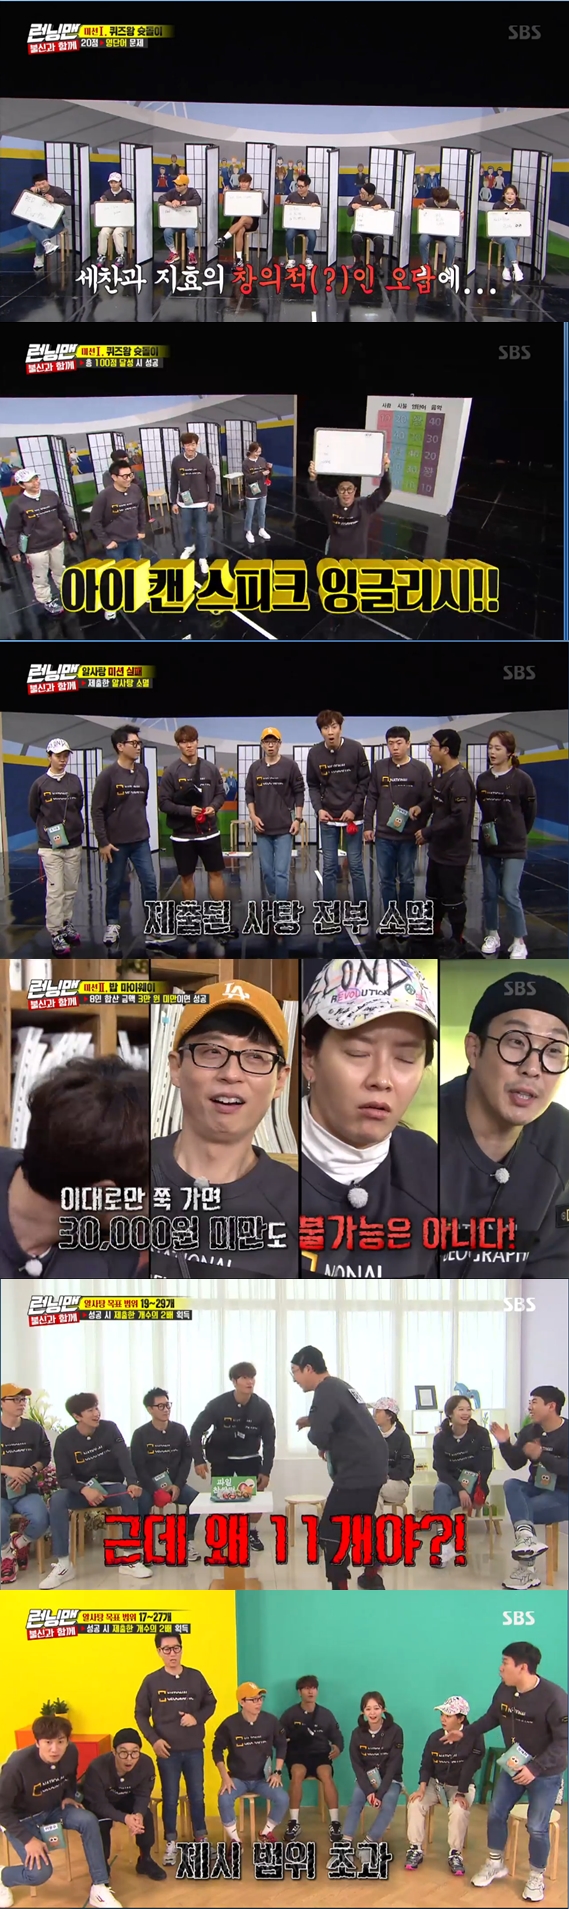 Lee Kwang-soo never let go of his greed.In the SBS entertainment program Running Man broadcasted on the night of the 1st, the members performed a group mission and performed Race with distrust, which received penalties in the order of less Candy in case of failure.Members who have been grouped for a long time have been asked not to betray each other before starting the race.At that point, Ji Suk-jin immediately ate the money as soon as he received the money converted egg Candy, which made everyone panicked; he asked naturally, Is not it okay to get it again?But the crew said firmly, I dont give it to you.The first group mission was the Queese King Shooter.As soon as the crew mentioned the mission, Haha voluntarily complained, saying, Its hard to pass as long as I have Yang Se-chan and Song Ji-hyo.Yoo Jae-Suk said, Song Ji-hyo is the worst of them, and Yang Se-chan laughed when he mumbled that he was a fish sister.Quiz The Hole duo Yang Se-chan and Song Ji-hyo showed off The Holemi from the first quiz.In the first quiz that came out with red, blue and purple in English, the rest of the members except for the two succeeded in dictating perfectly.But Yang Se-chan and Song Ji-hyo wrote creative words and made the production crew laugh.On the other hand, Haha, one of the three Hole rooms, wrote down three words perfectly, and after confirming the correct answer, he shouted I Can Speak English and laughed.The second quiz was a song quiz that the members were confident about. But the song that the crew made was the outsiders lonely.The members were embarrassed by the fast rap, and there were no members who heard it twice but heard it properly; only Lee Kwang-soo correctly answered.After checking the correct answer, he shouted, I am not a fool.The members who failed to get the correct answer during the second attempt at the first quiz commission were alive and well in the third attempt.The members had to guess who the star was after seeing the young picture, and the members were given three photos, and the members easily matched Kim and Lee Young-ae.However, there was confusion among the members over the last picture.At that time Yang Se-chan caught the feeling, and Yoo Jae-Suk laughed, saying, Do not let me know, who is it?In the end, the members exchanged hints with each other and hit a strong me, and at the end of the twists and turns, they got 20 points.In the next character quiz, the members used all kinds of shortcuts but did not get the score easily.In a quiz that does not overlap the movie starring Lee Byung-hun and Jeon Do-yeon, the members did not succeed in the correct answer.The crew added a new problem for members who failed to score; the members had to write down the name of Russian President Vladimir Putin in full.However, except for Yoo Jae-Suk, no one was able to get enough of the first mission, and eventually did not get the first one.The members who did not succeed in the first mission gave the crew the opportunity to acquire Al Candy.Each member could double when they filled their Al Candy with my target range.However, Yoo Jak-seok, Lee Kwang-soo, and Haha failed to make the commission because they did not pay any AlCandy. The members resented each other.Yang Se-chan made an Al Candy, but he asked why the members did not pay it, and he made an unfair situation.Lunch and iced rice cakes were put on and the members made their second mission.In the second mission, members could eat both lunch and snacks if they did not exceed the designated amount by adding the sum of the food they wanted.Kim Jong-kook, who heard the explanation, said, Everyone unify with white paper. So, Jeon So-min laughed, saying, Kim Jong-kook is also great.The members agreed to choose properly before entering the choice, but the members who saw the food were shaken. Haha, who first entered, picked the pork cutlet and bought the members cause.However, all of Yoo Jae-Suk, Song Ji-hyo, Lee Kwang-soo, and Yang Se-chan have chosen ramen, and the success of the mission has come to the fore.But the atmosphere subsided at the moment when Ji Suk-jin picked a soy sauce formula.As soon as the members originality burst out, Jeon So-min was able to succeed in the mission by choosing boiled eggs and Kim Jong-kook.Ji Suk-jin, who picked up soy sauce during the meal, continued to receive the members glare.In the subsequent acquisition mission, Kim Jong-kook won nine AlCandy.The third mission, Answer the Category, failed; the return of the Candy acquisition mission was the same as the first.The members once again suspected Yang Se-chan, who had Al Candy in the first mission, and eventually he made all six of his Al Candy.But this time he succeeded in the commission, and Yang Se-chan won 12 Al Candy.Lee Kwang-soo, who did not give AlCandy, became a bottom at once.In the final mission, Lee Kwang-soo had to fail in the group mission to escape from the bottom.Lee Kwang-soo had the last chance to escape the bottom by unfolding a clever sabotage.Lee Kwang-soo, who entered the room, submitted nine Al Candy after worrying until the end.However, the number of gathered eggs was 28 in excess of 27, and Lee Kwang-soo was wearing a bottom.